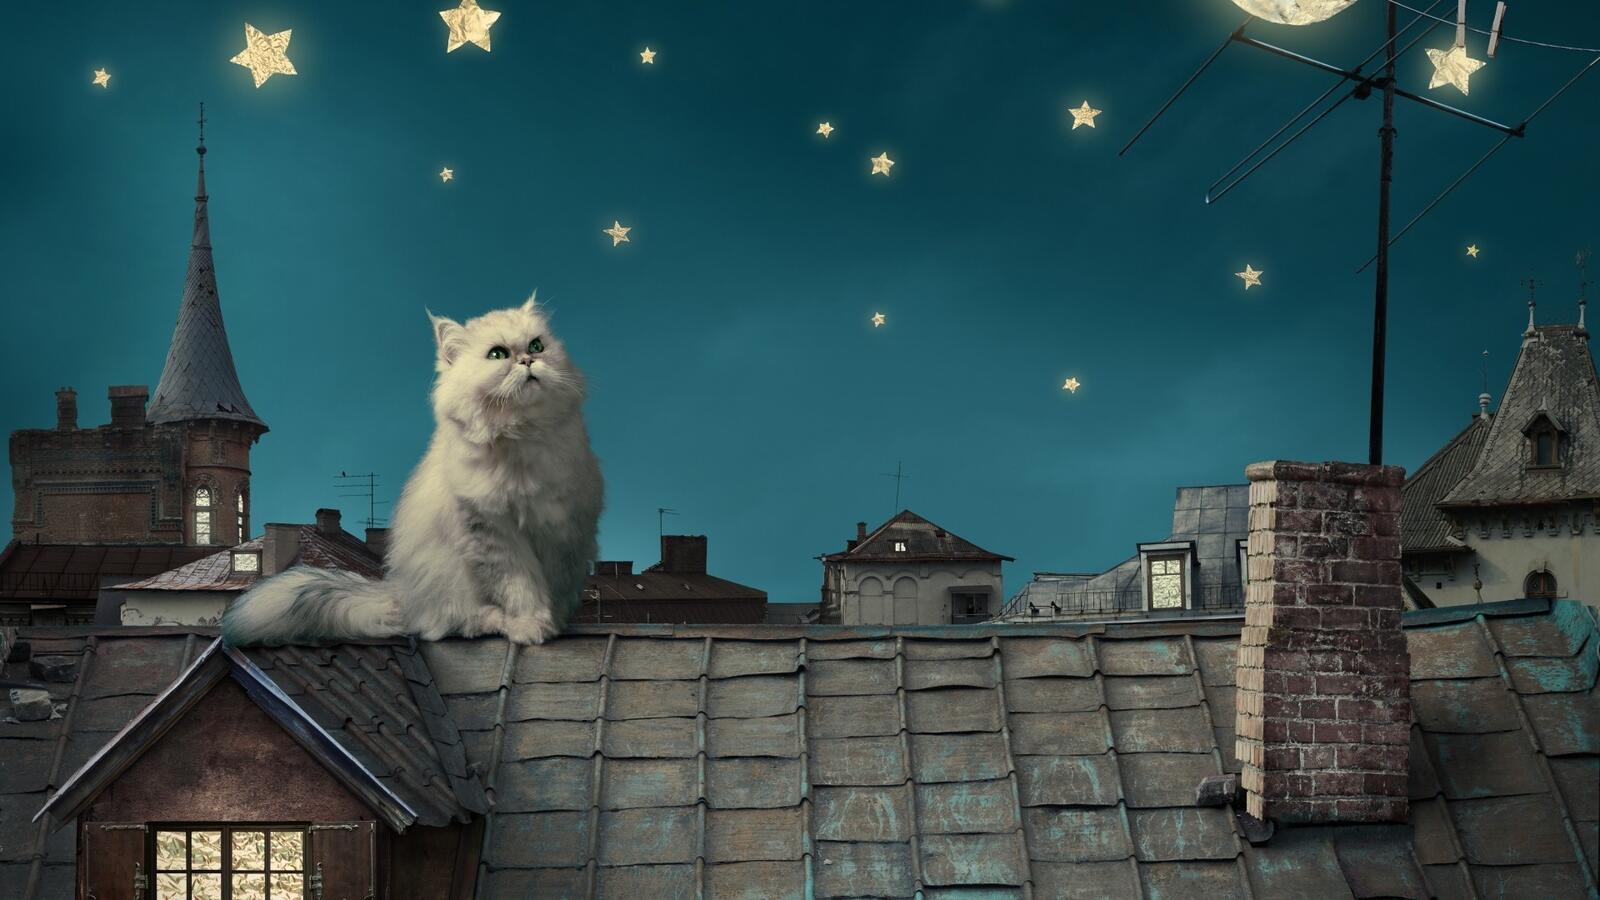 Free photo A white cat sits on the roof of a house and looks up at the stars